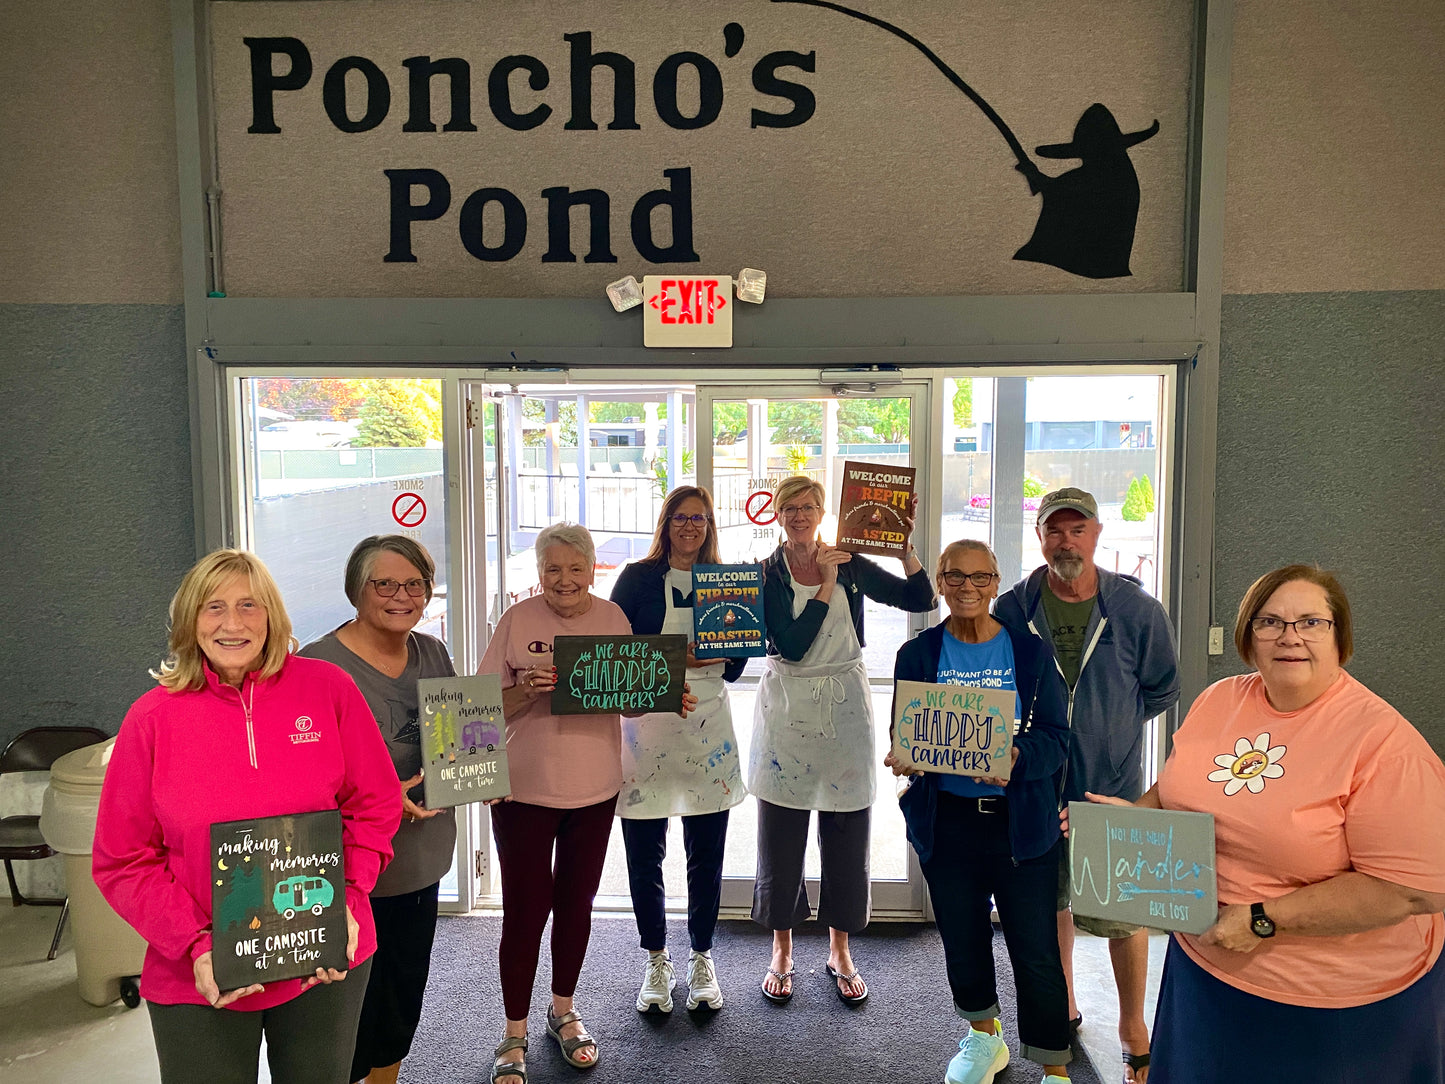 August 15th - Wood Sign Party at Poncho's Pond Campground!